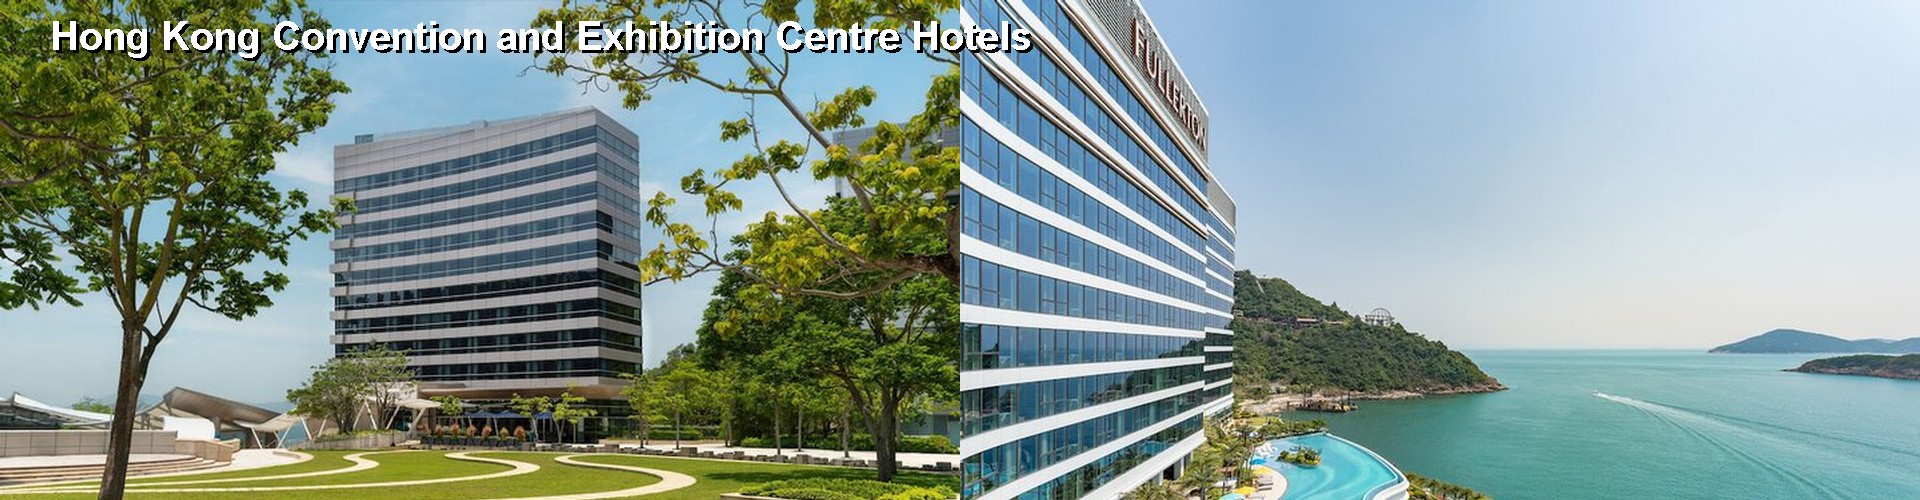 5 Best Hotels near Hong Kong Convention and Exhibition Centre